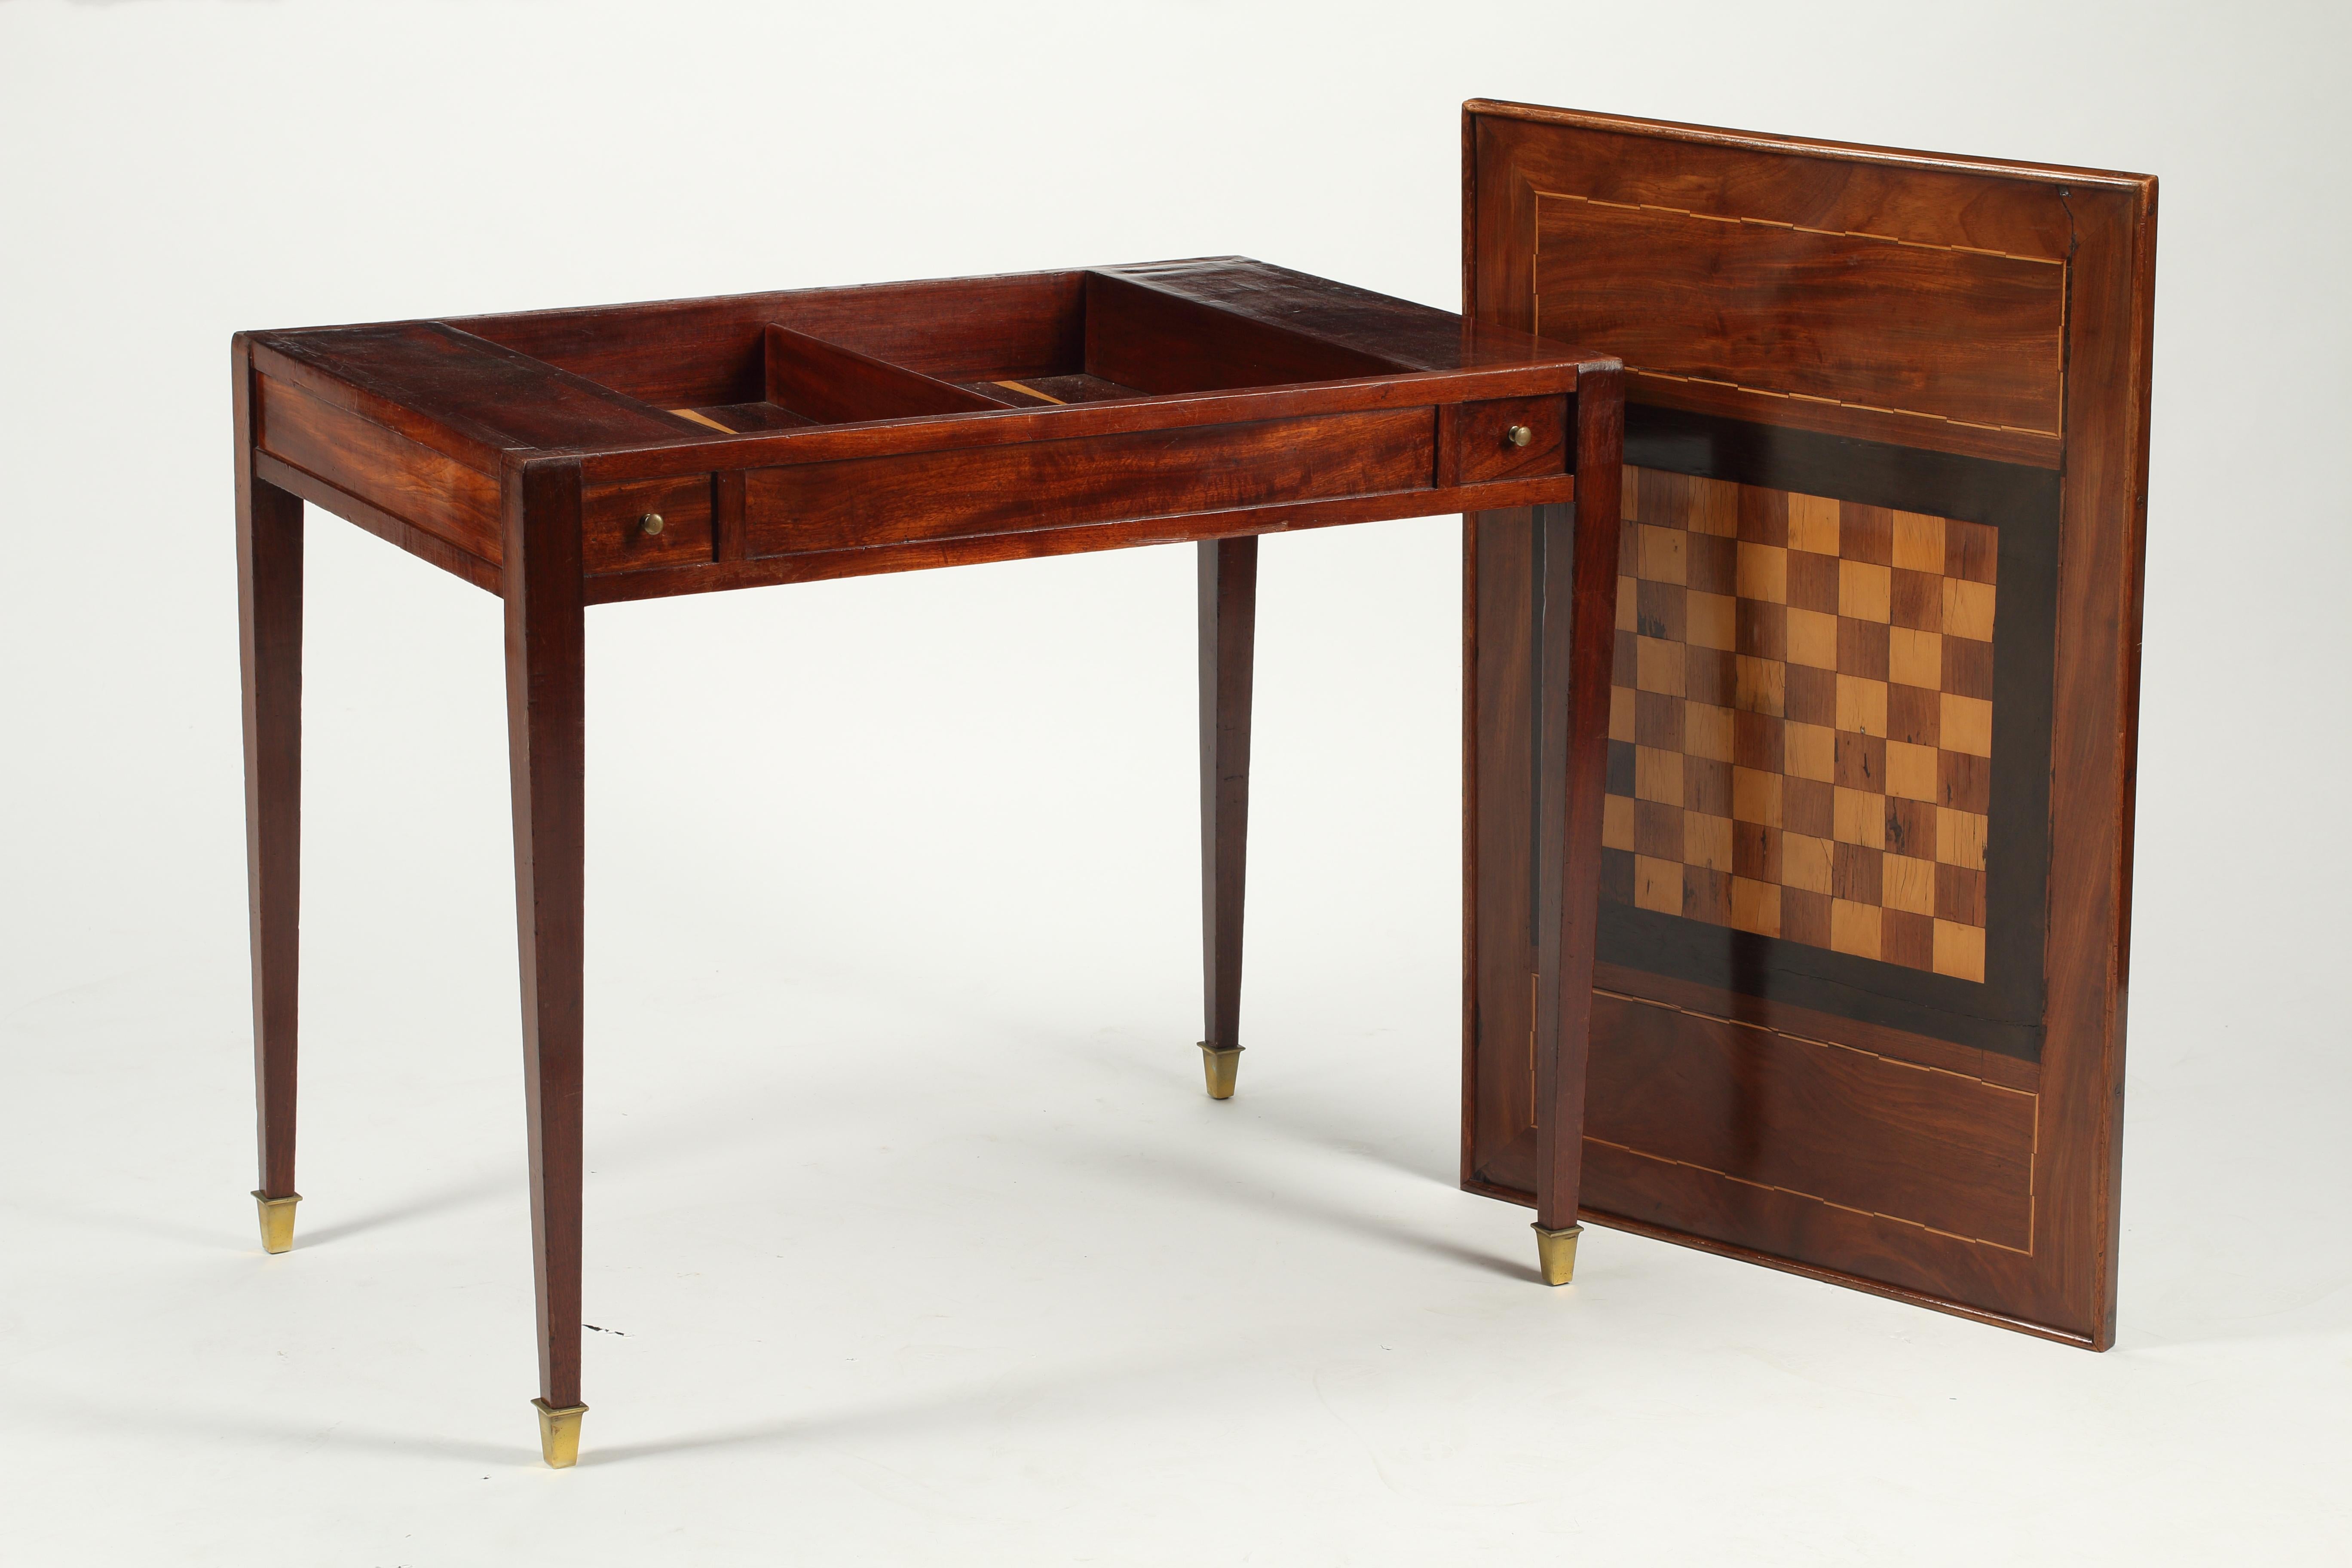 19th century French Empire period Tric Trac Games Table. The top features an inlaid checkerboard with delicate veneered inlays framing each players side. When flipped over, inset green felt top allows players to enjoy card and other games. Removing